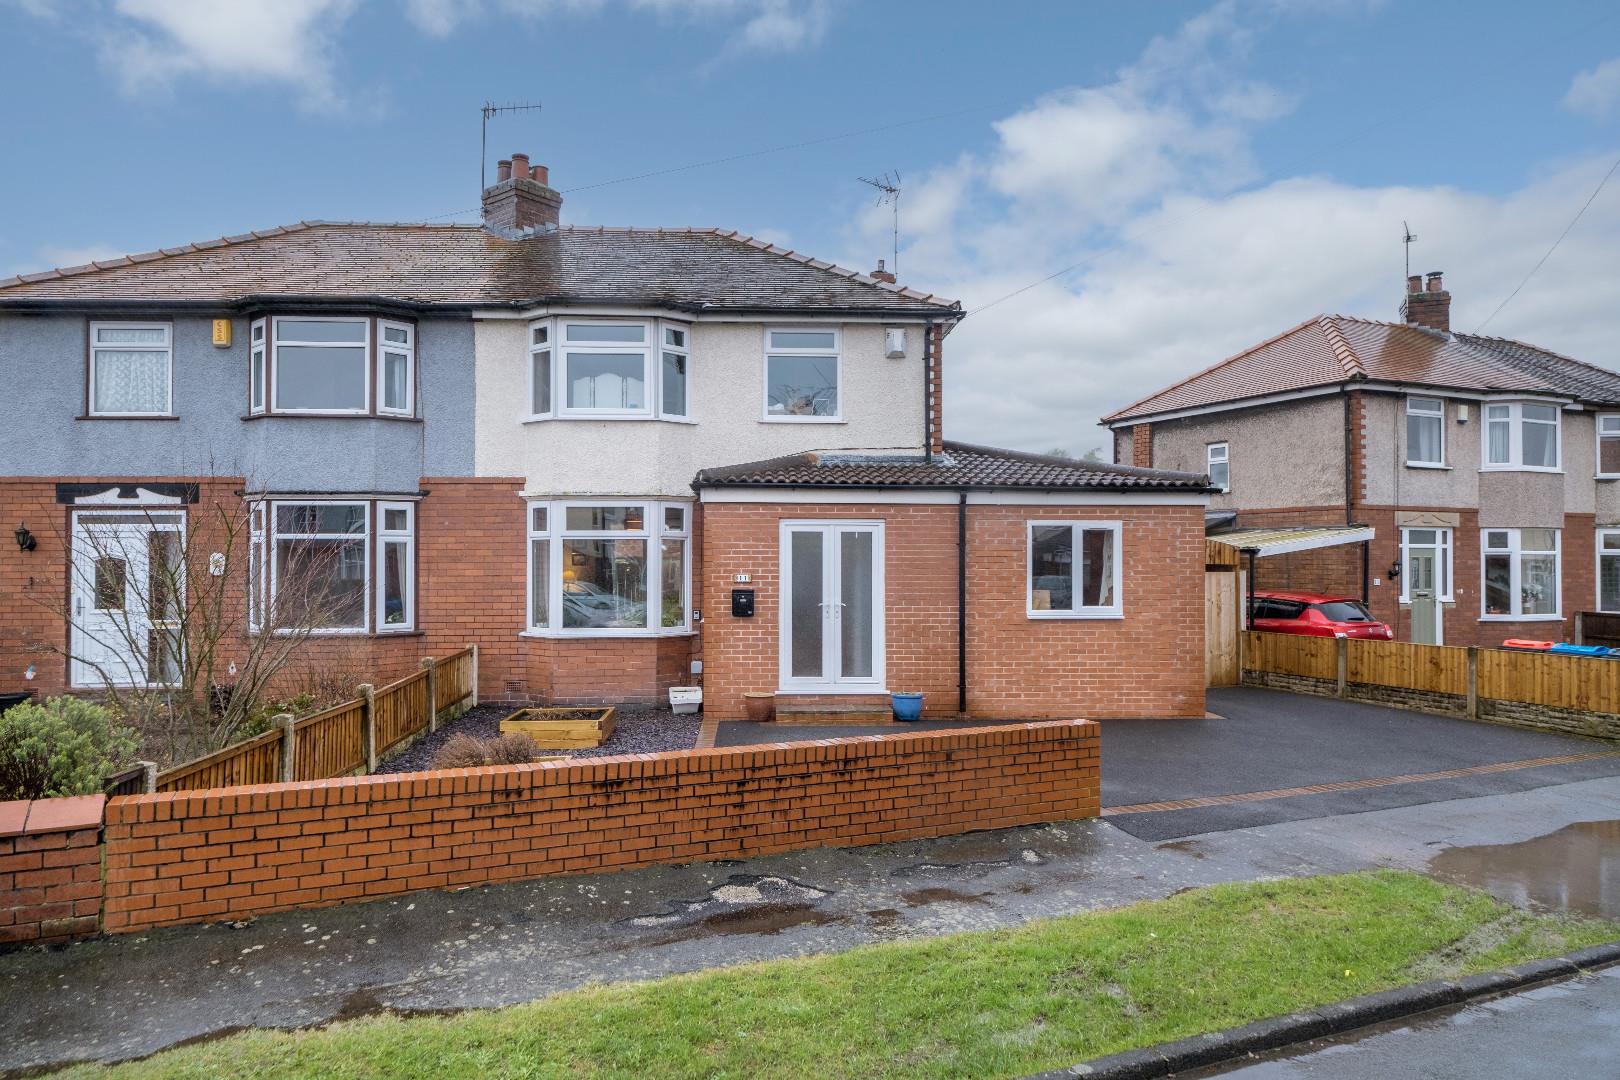 3 bedroom  Semi Detached House for Sale in Frodsham